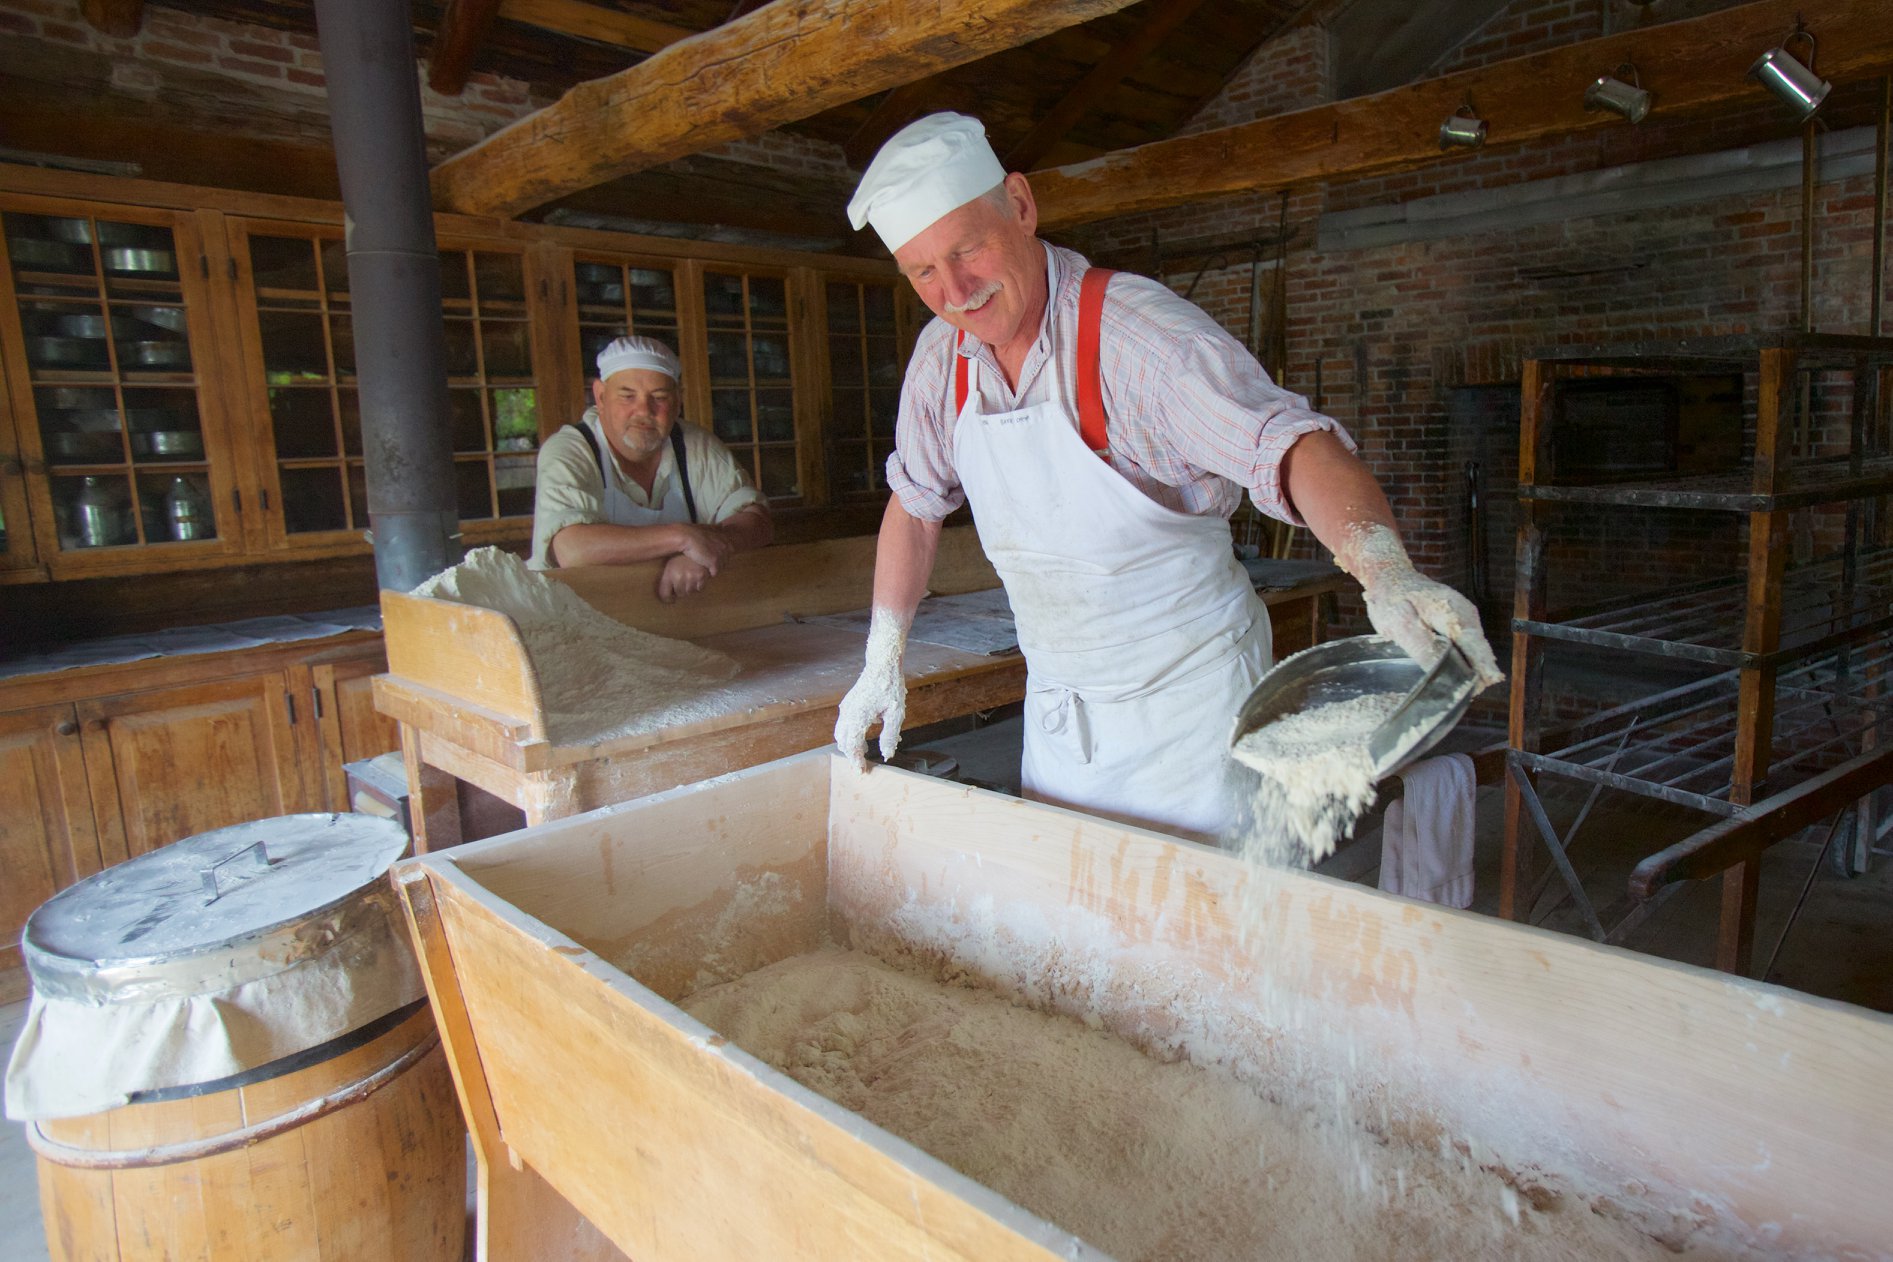 Bakers at Upper Canada Village making bread